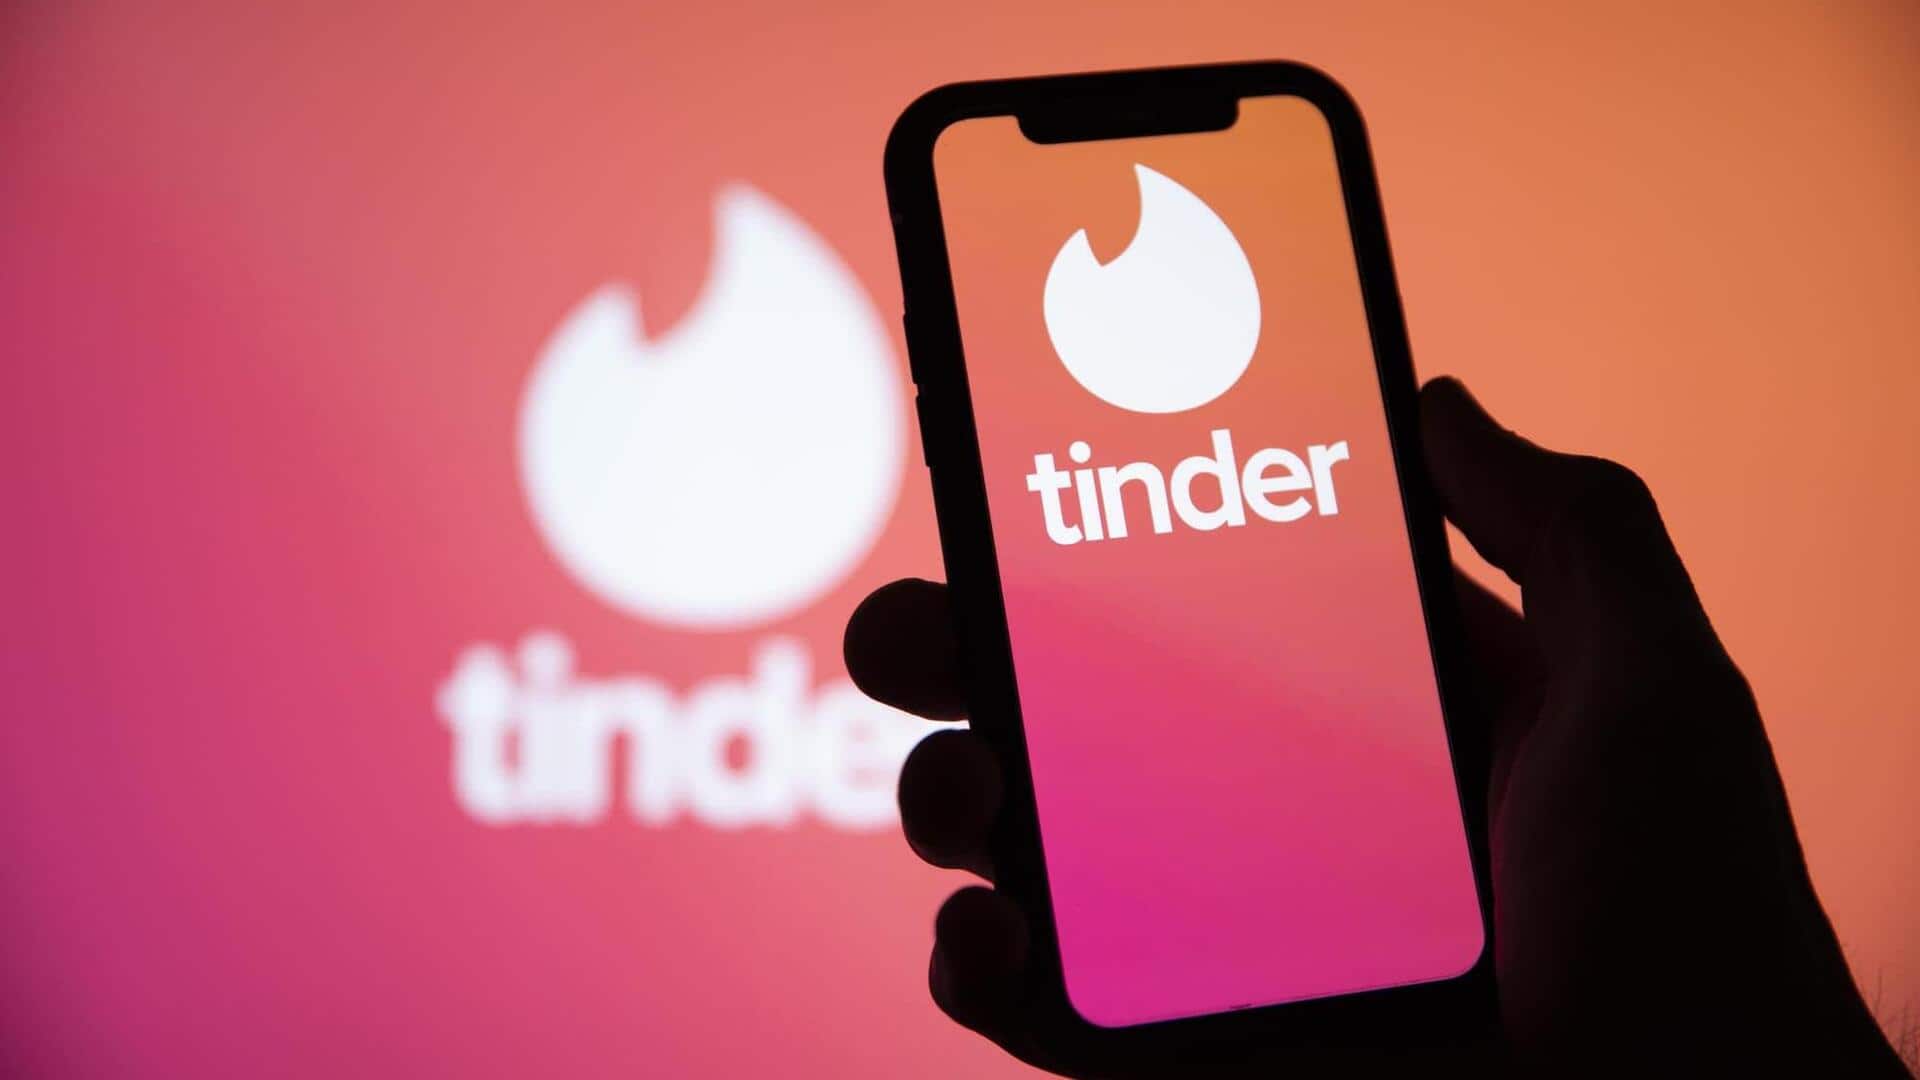 Tinder, Yuvaa join hands for free online course on consent